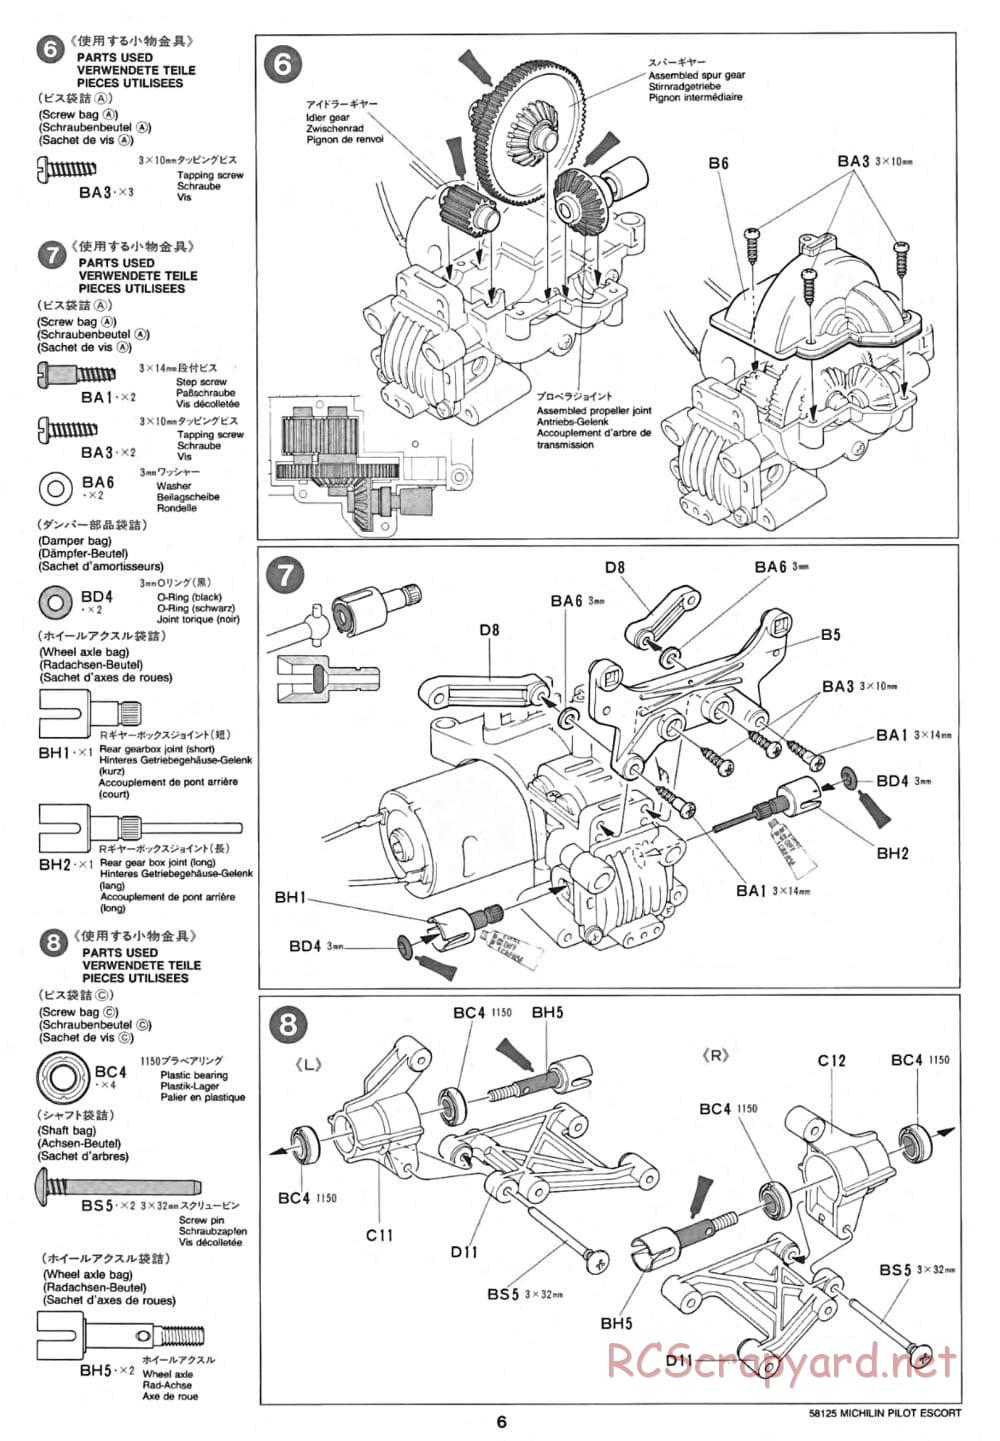 Tamiya - Michelin Pilot Ford Escort RS Cosworth - TA-01 Chassis - Manual - Page 6